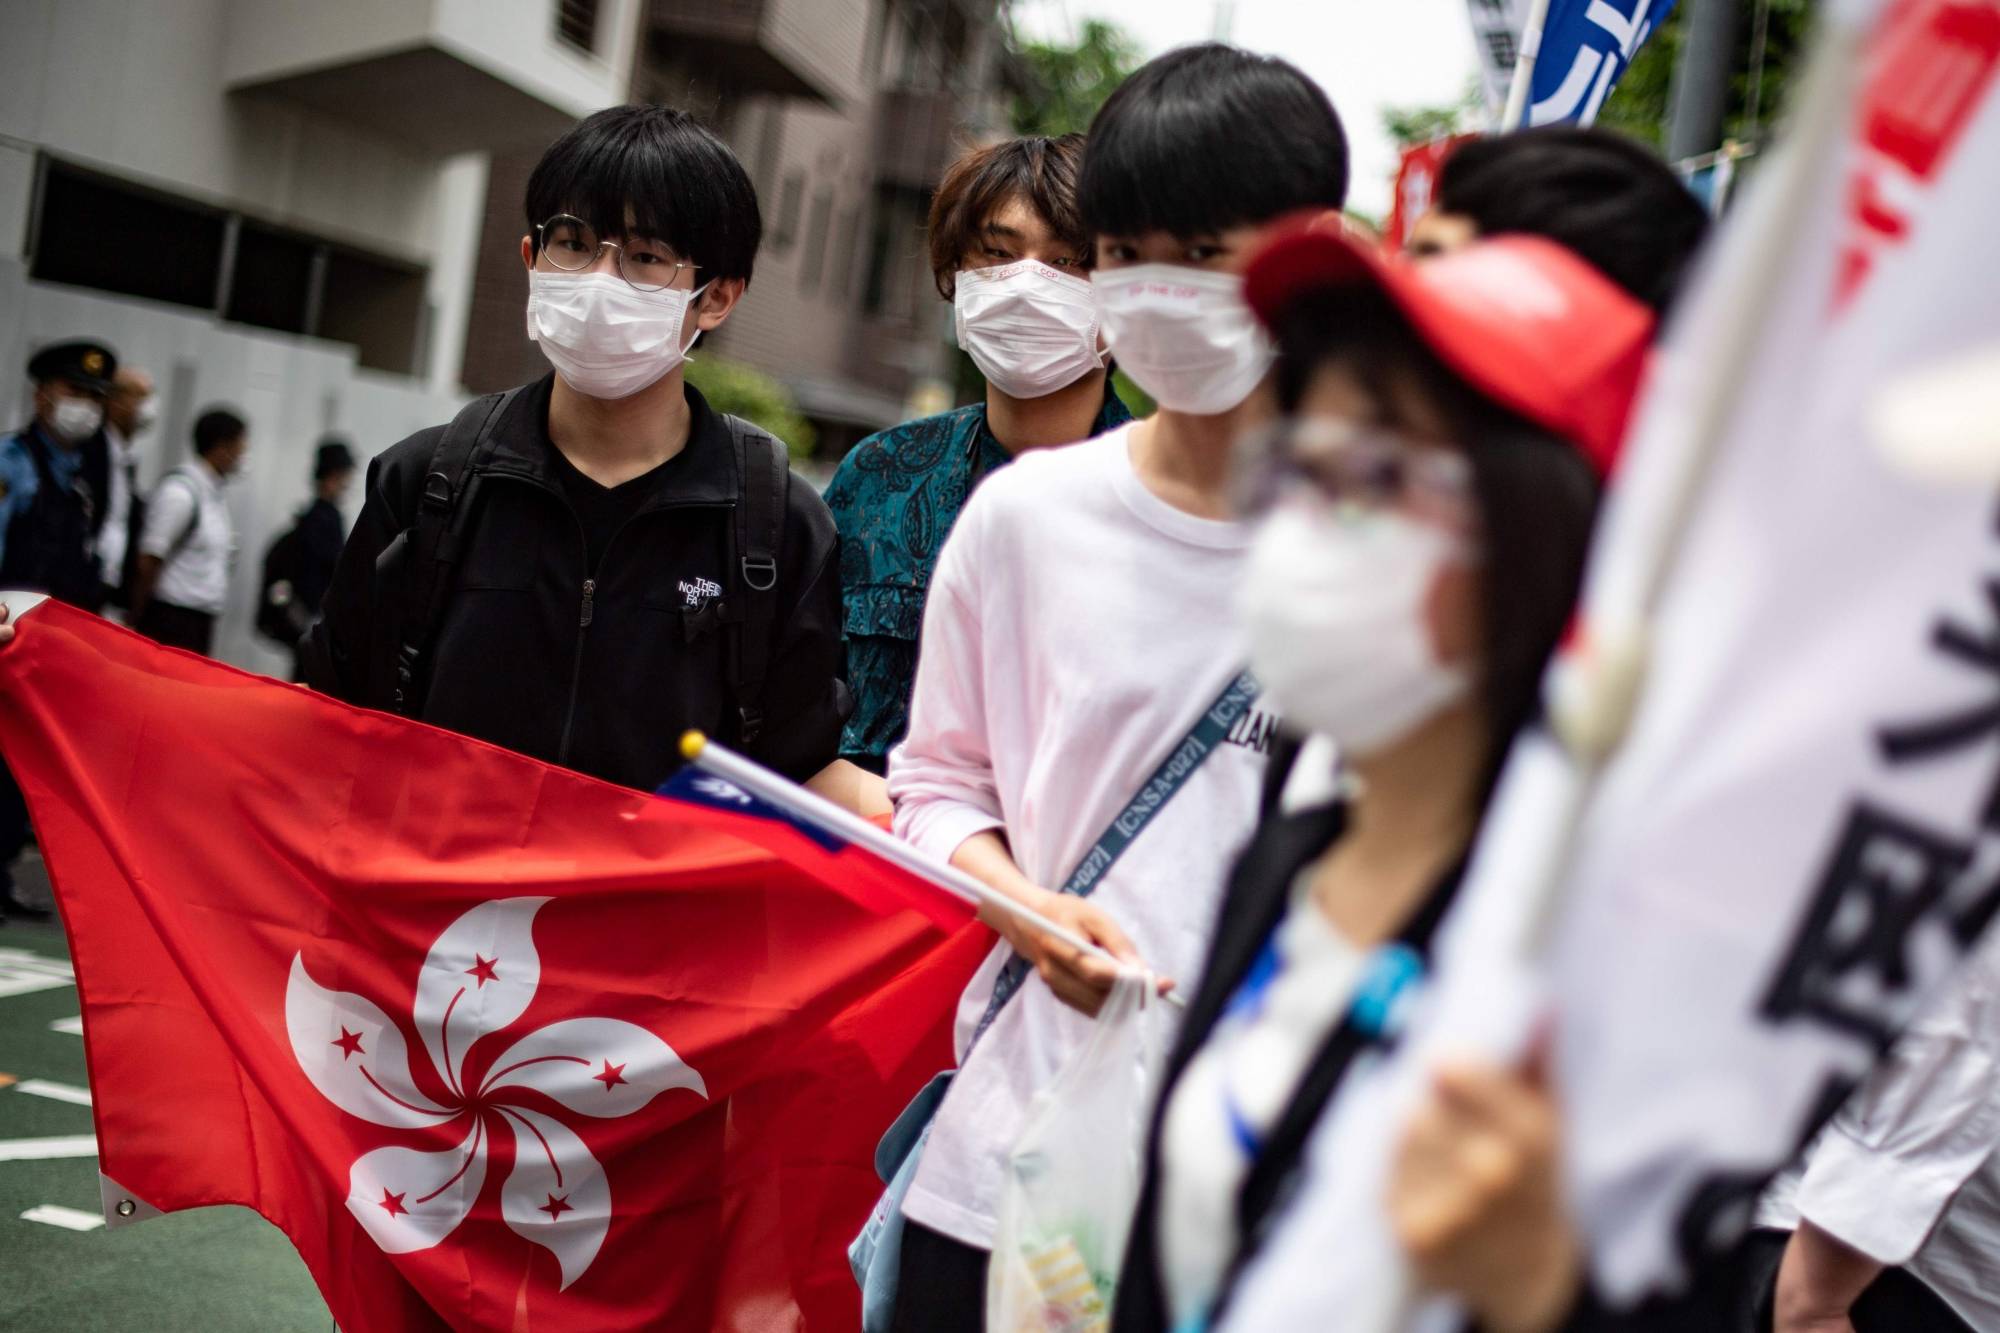 A group of pro-democracy activists hold a Hong Kong flag as they walk to the Chinese Embassy in Tokyo during a protest march on June 4. | AFP-JIJI